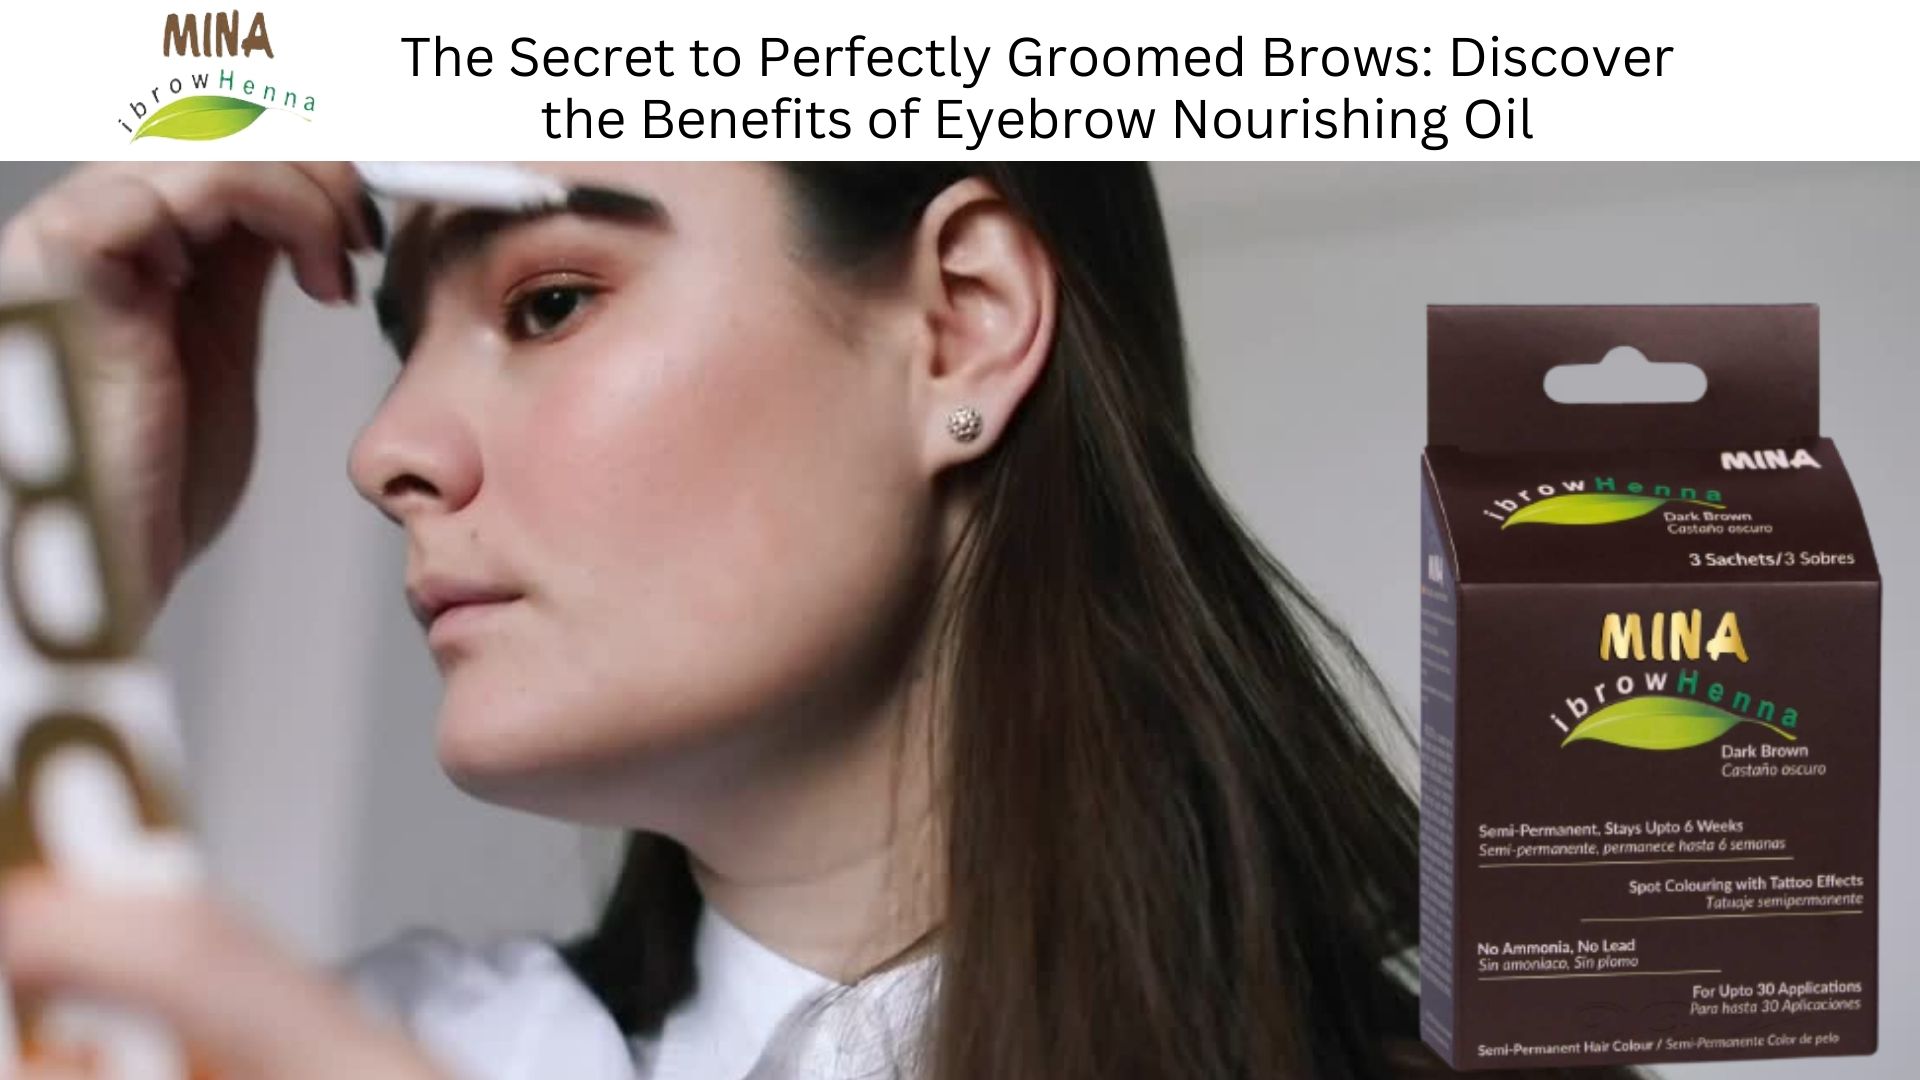 The Secret to Perfectly Groomed Brows: Discover the Benefits of Eyebrow Nourishing Oil